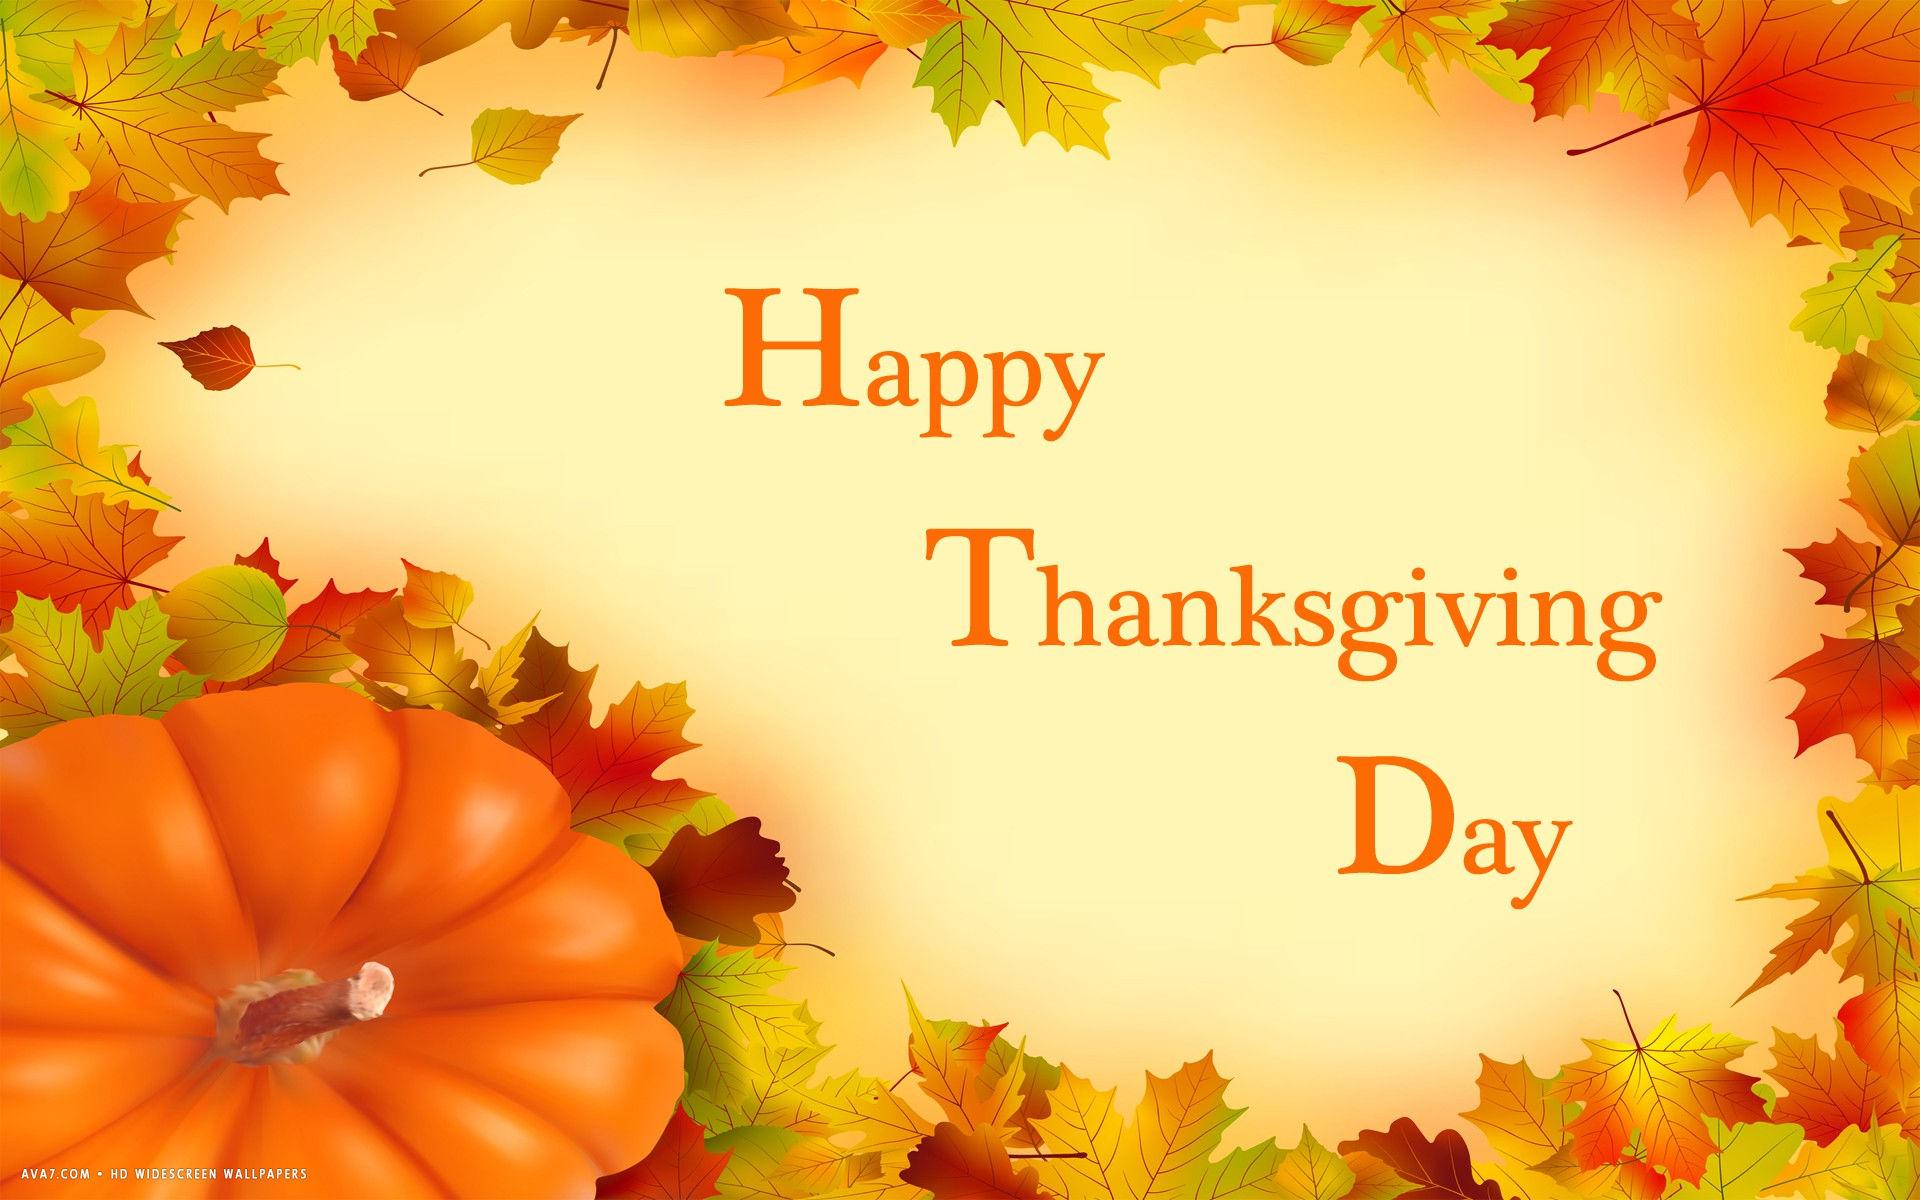 happy thanksgiving day wishes pumpkin yellow red leaves